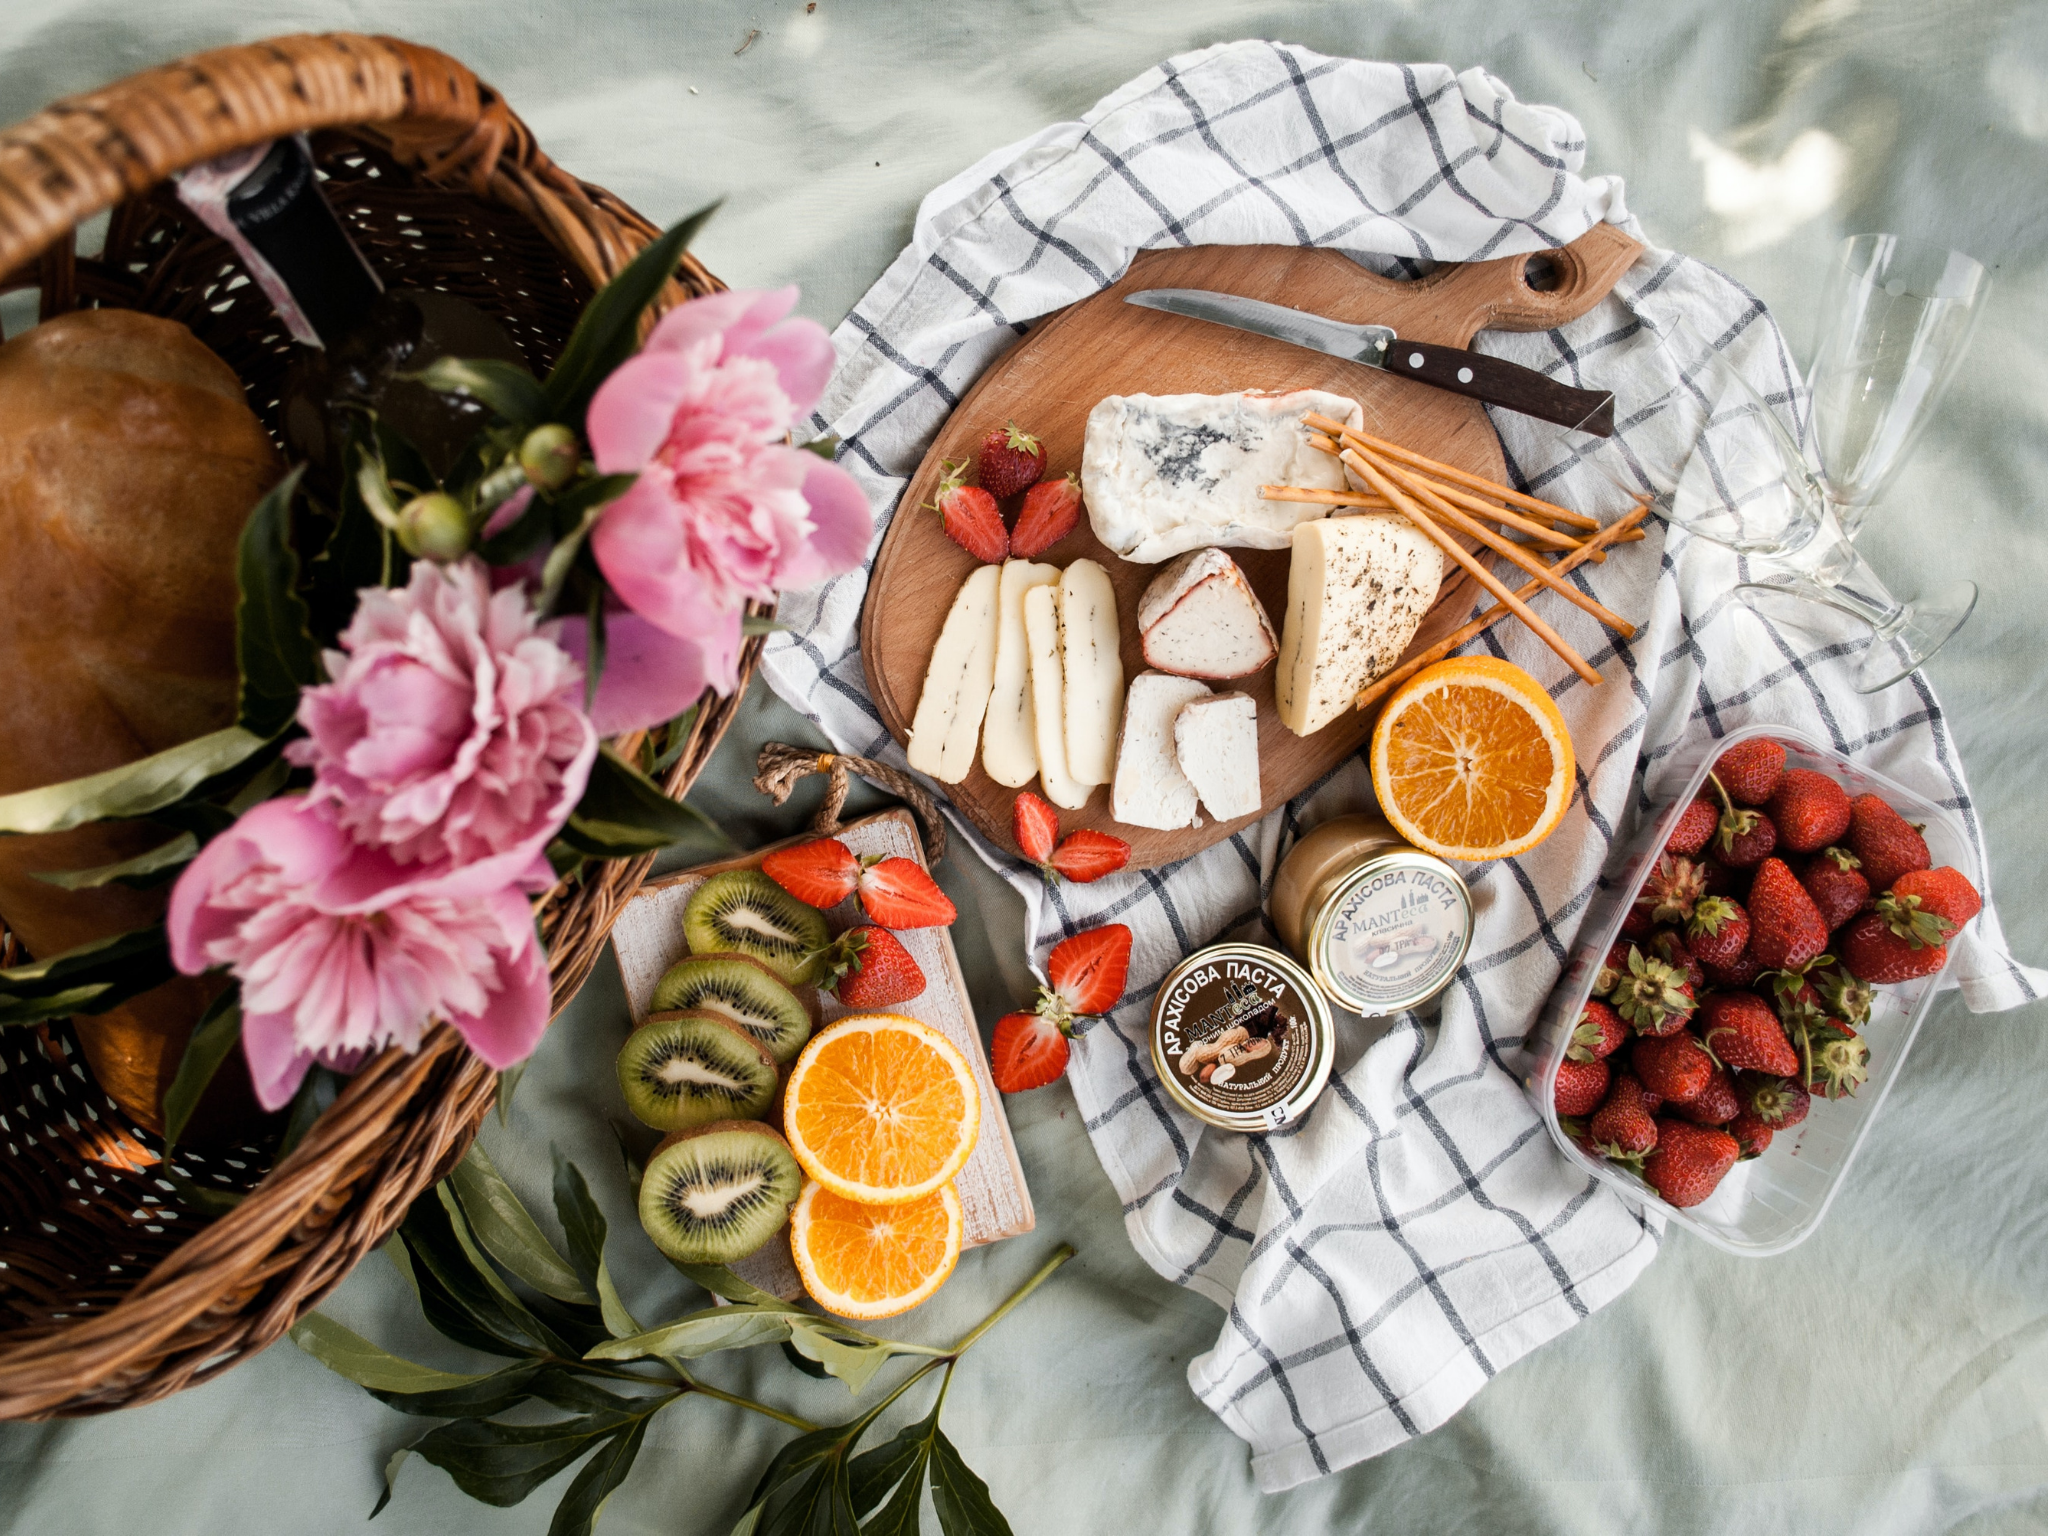 How to have the best picnic ever (even if you hate picnics)